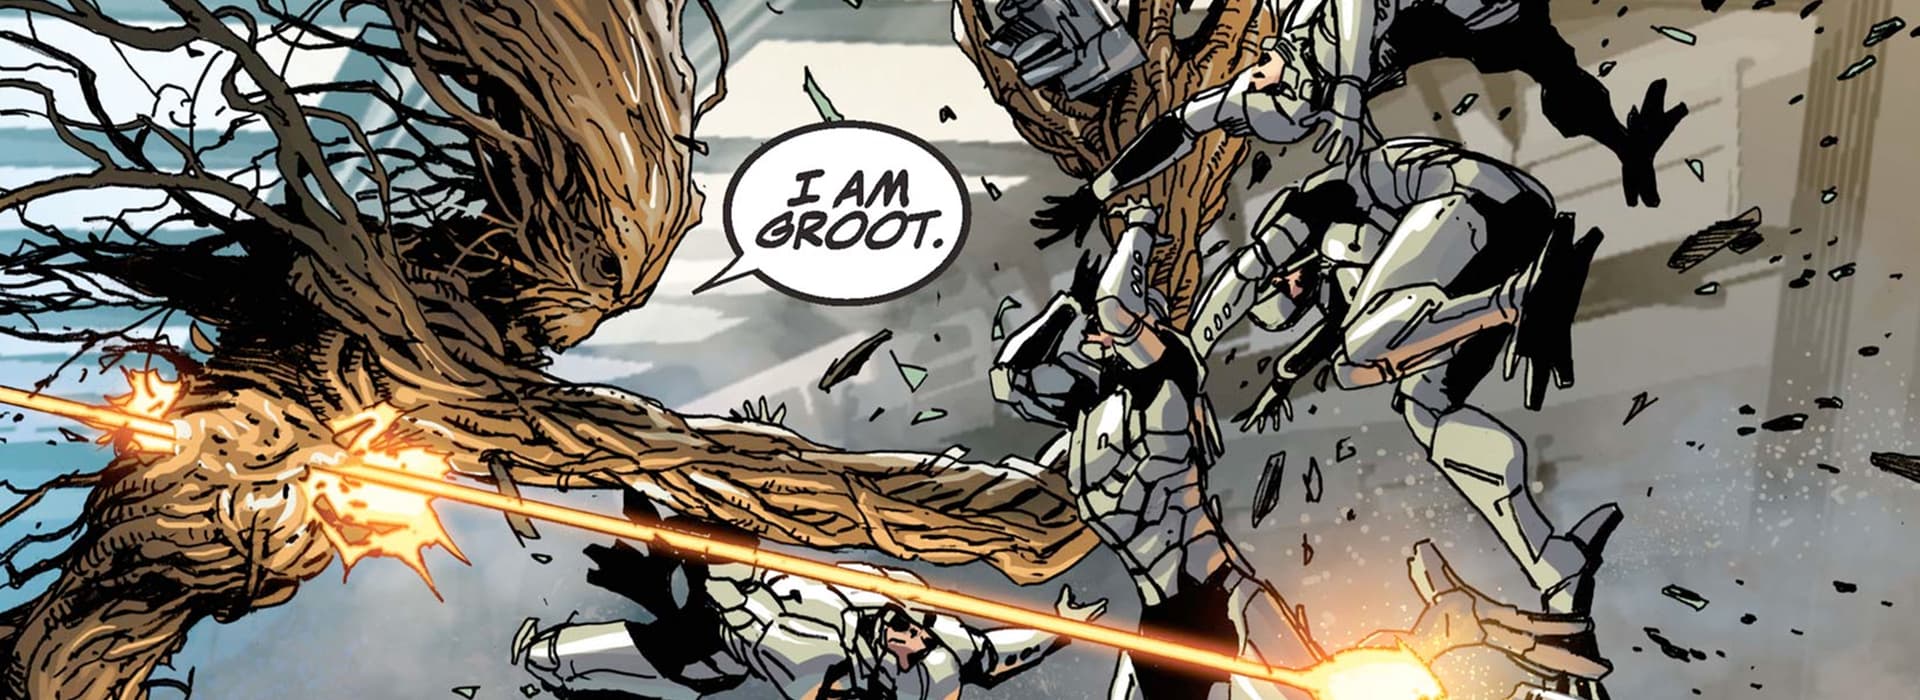 Groot In Comics Full Report Page Divider